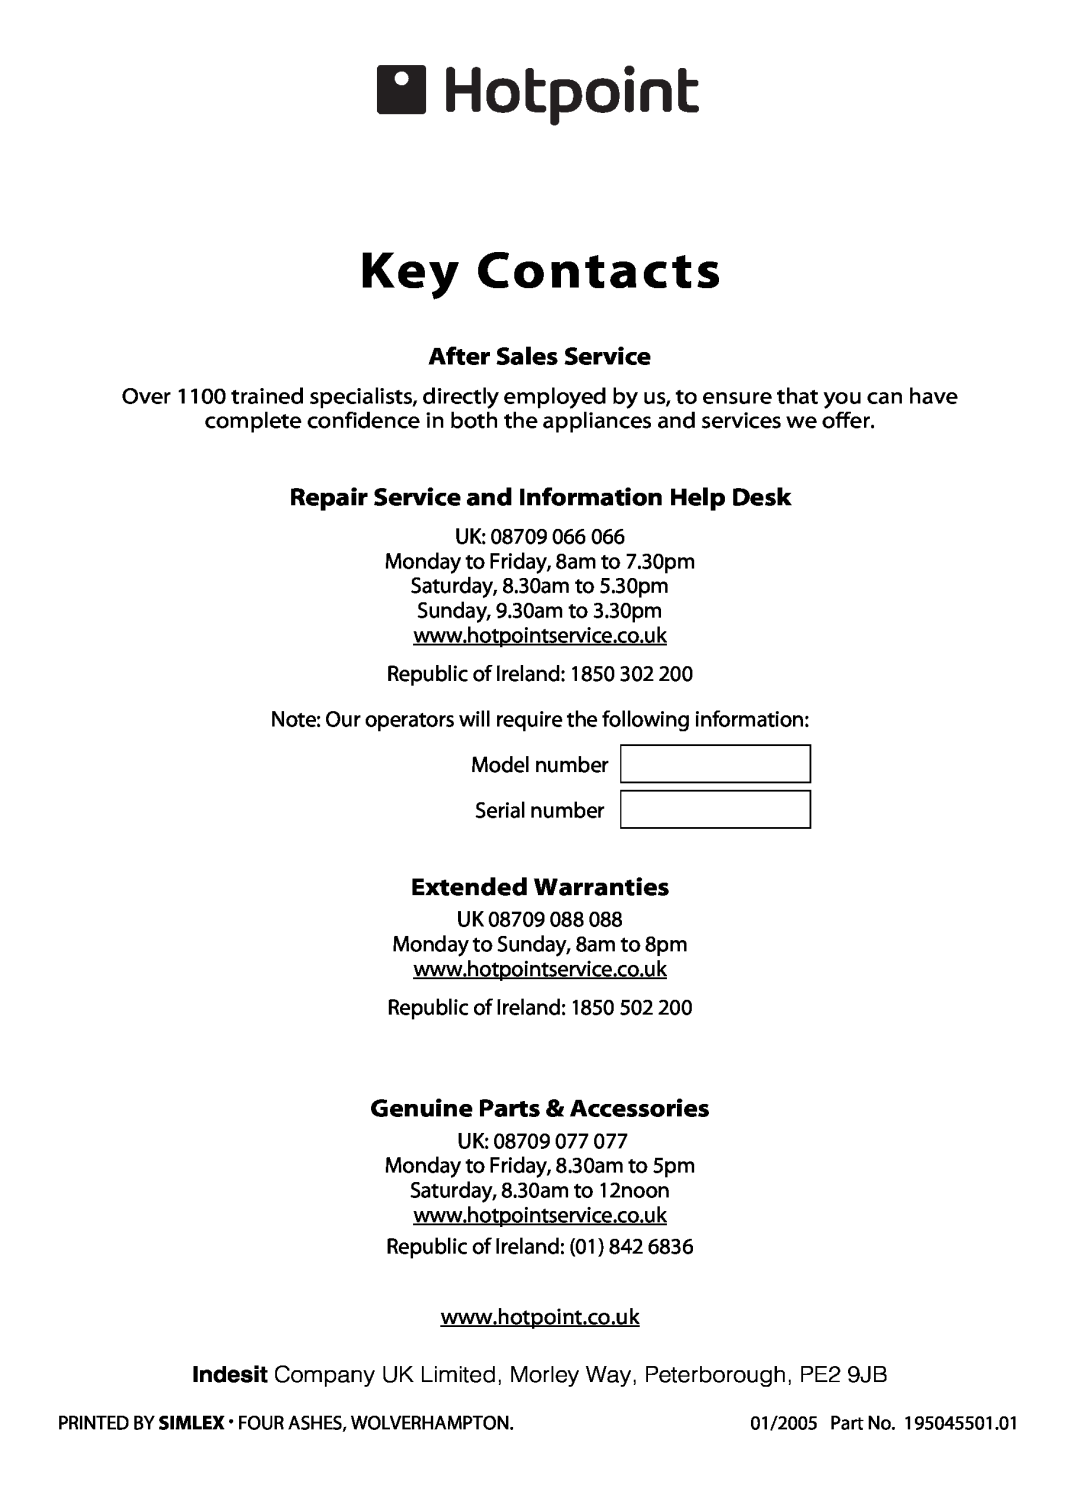 Hotpoint X253E, X153E Key Contacts, After Sales Service, Repair Service and Information Help Desk, Extended Warranties 